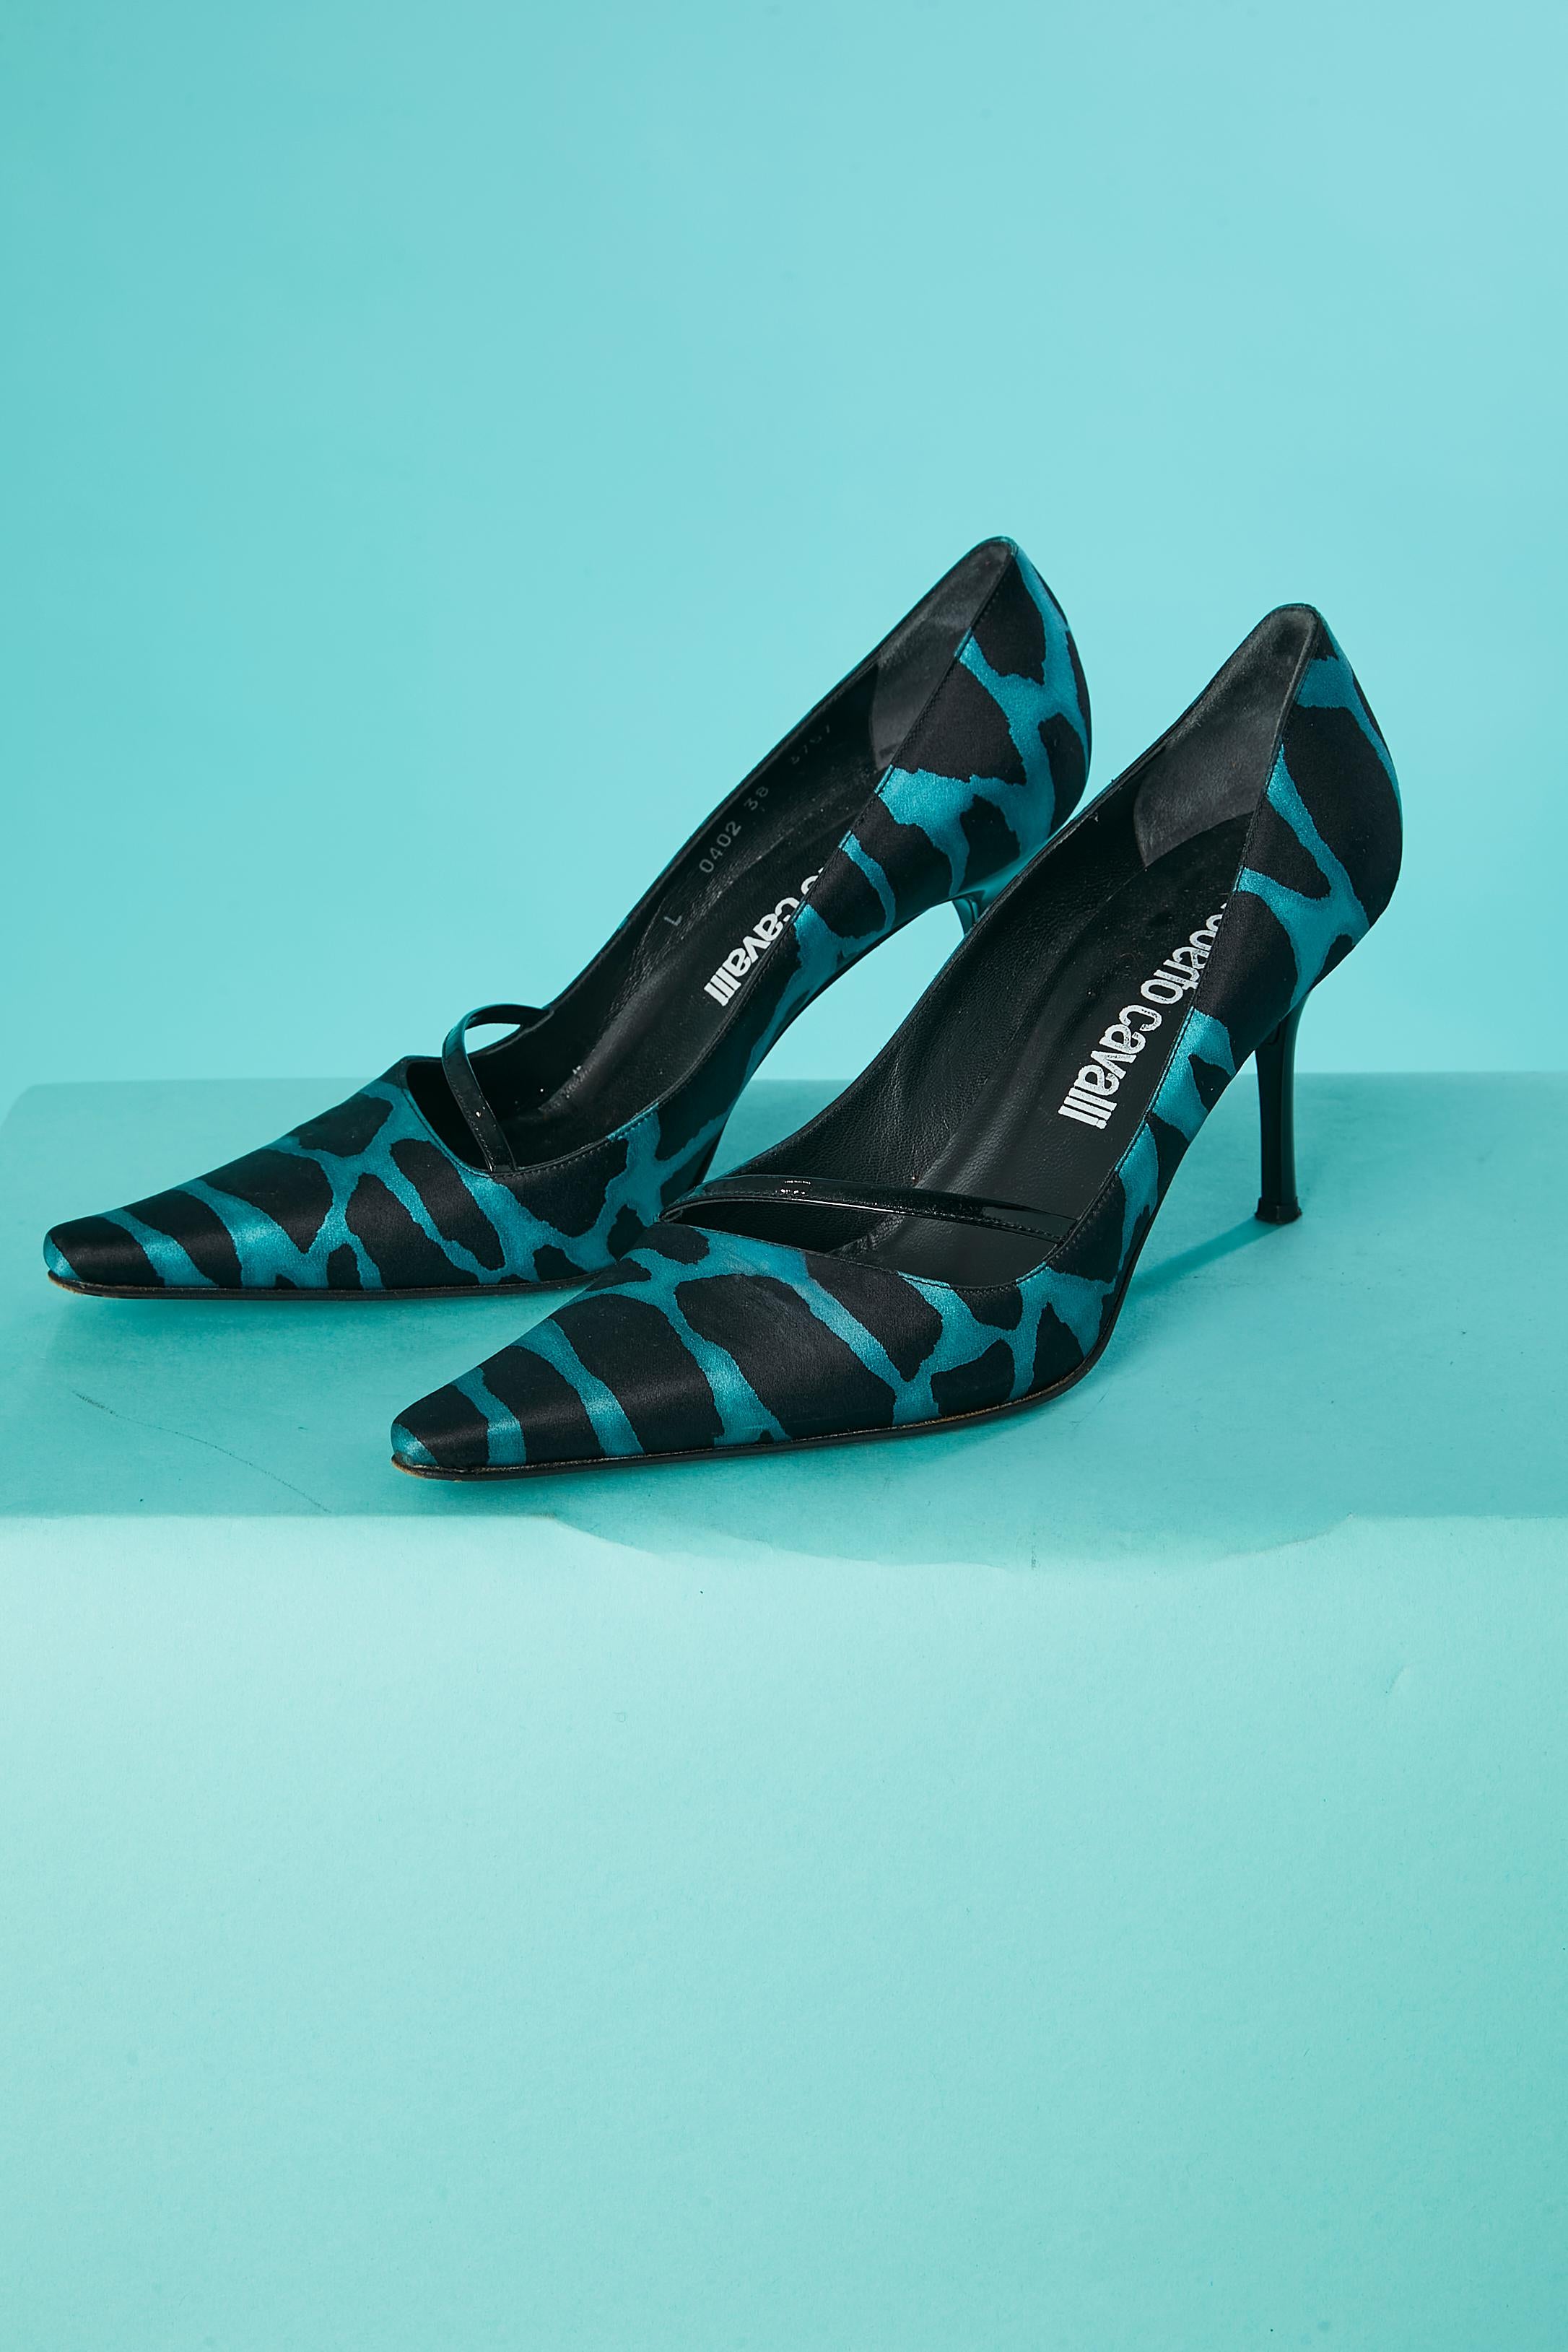 Black and blue zebra printed fabric pump with black patent leather strap.
Heel's height : 8,5 cm 
SHOE SIZE : 38 (Eu) 6,5 (US) 